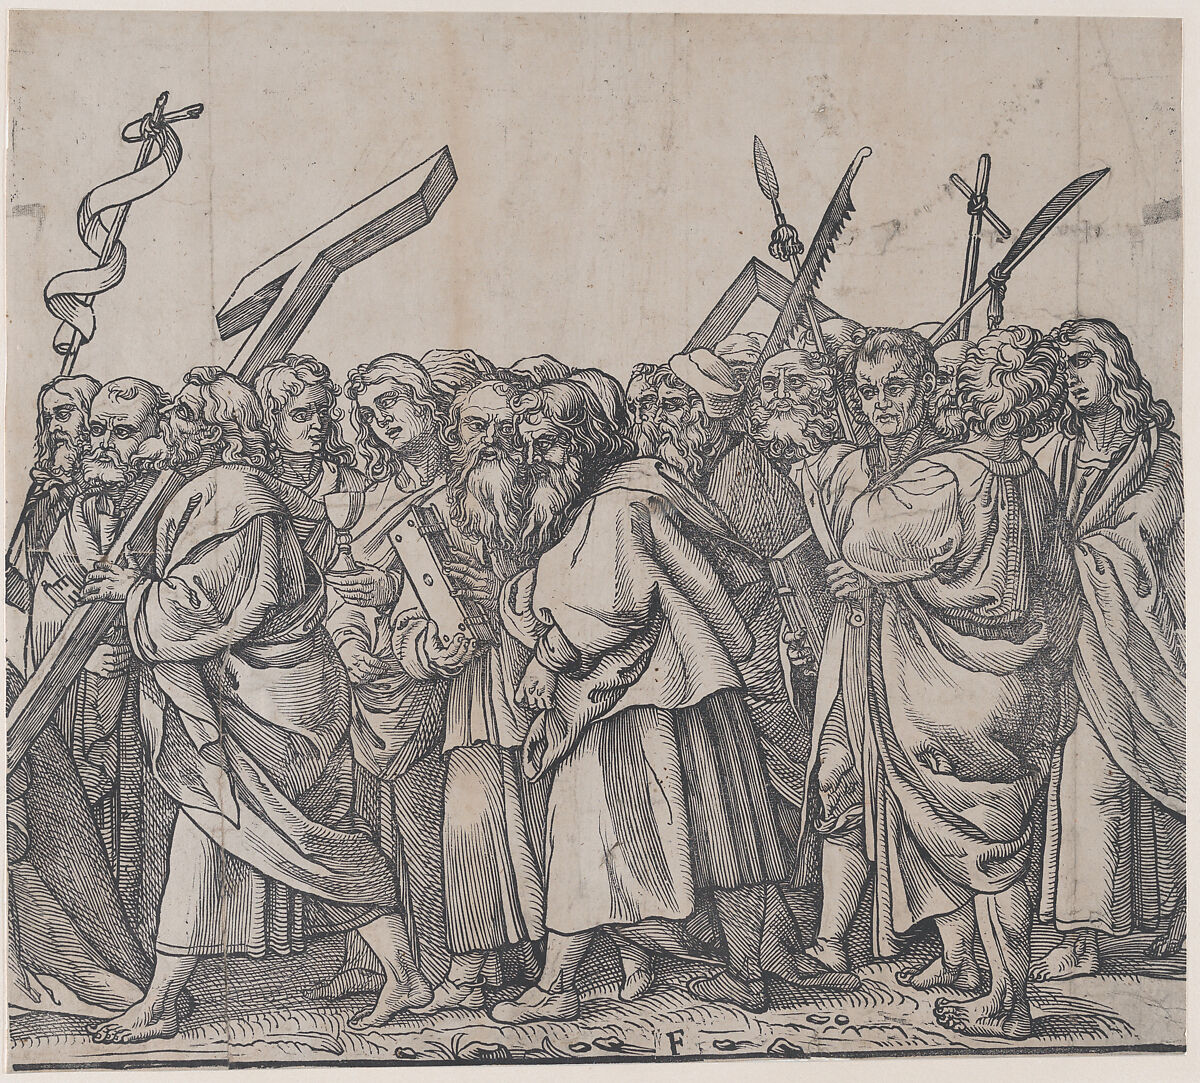 Section F: Saints holding crosses, books, and weapons, from "The Triumph of Christ", Andrea Andreani (Italian, Mantua 1558/1559–1629), Lithographic copy of a woodcut 